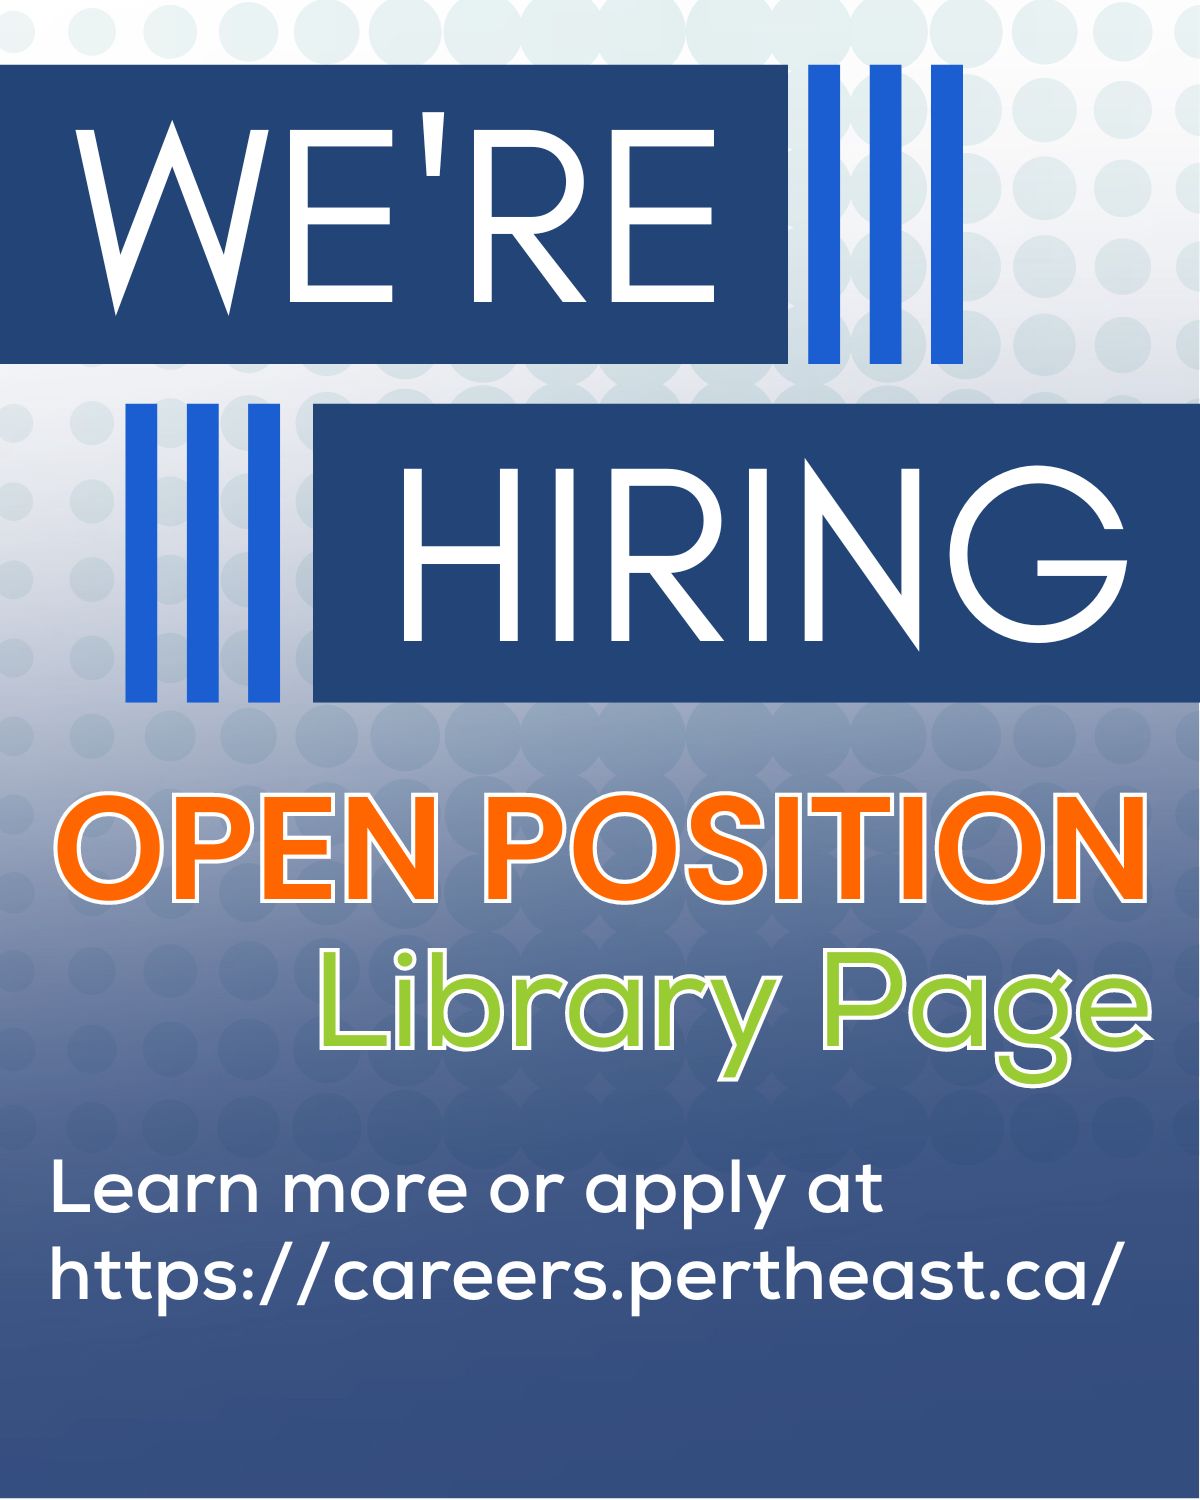 We're Hiring! Open Position: Library Page